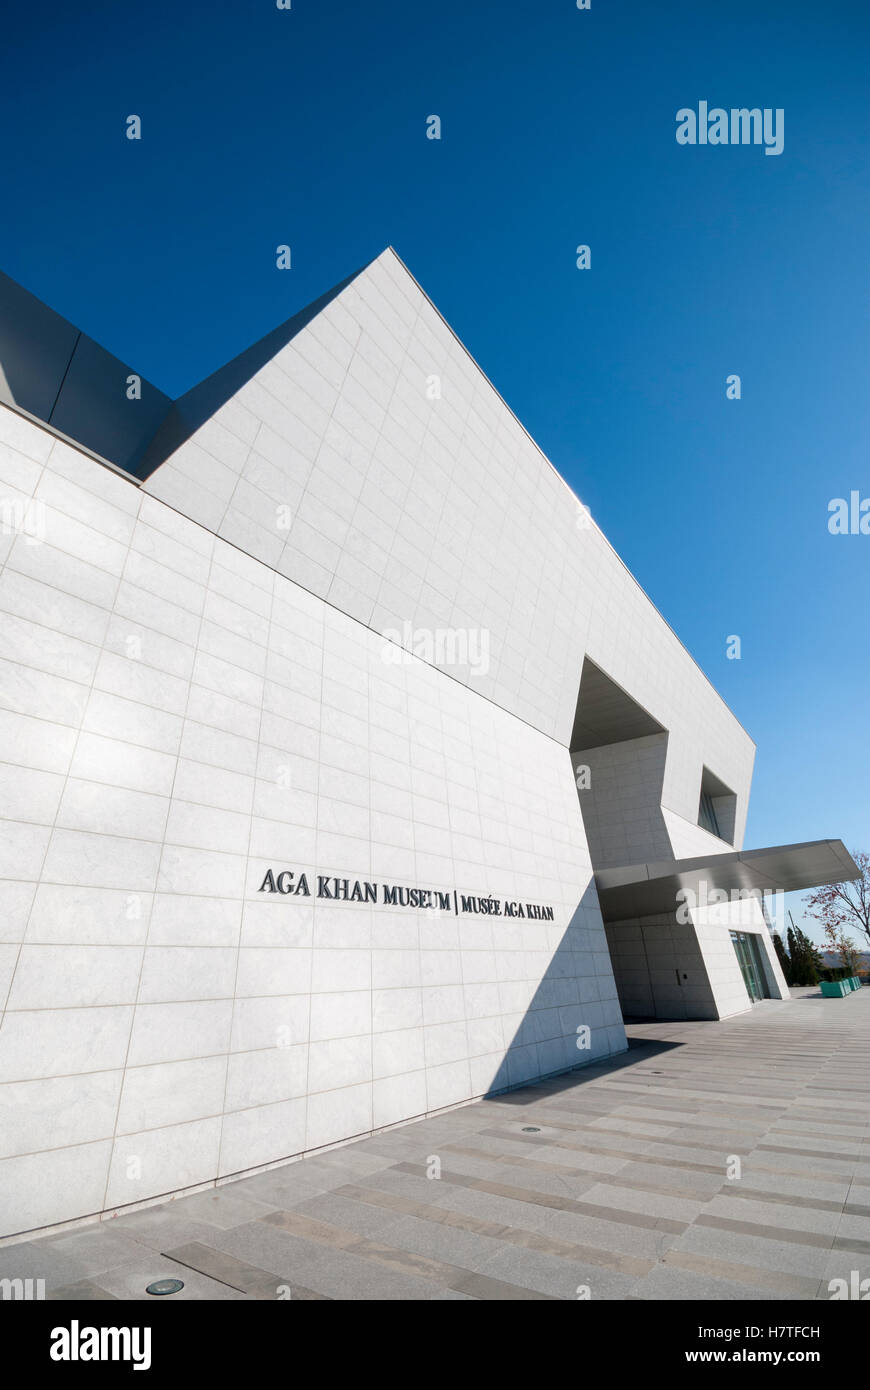 The dramatic modern exterior and entrance of the Aga Khan Museum, a centre for Islamic art, Iranian art and Muslim culture in Toronto, Ontario Canada Stock Photo